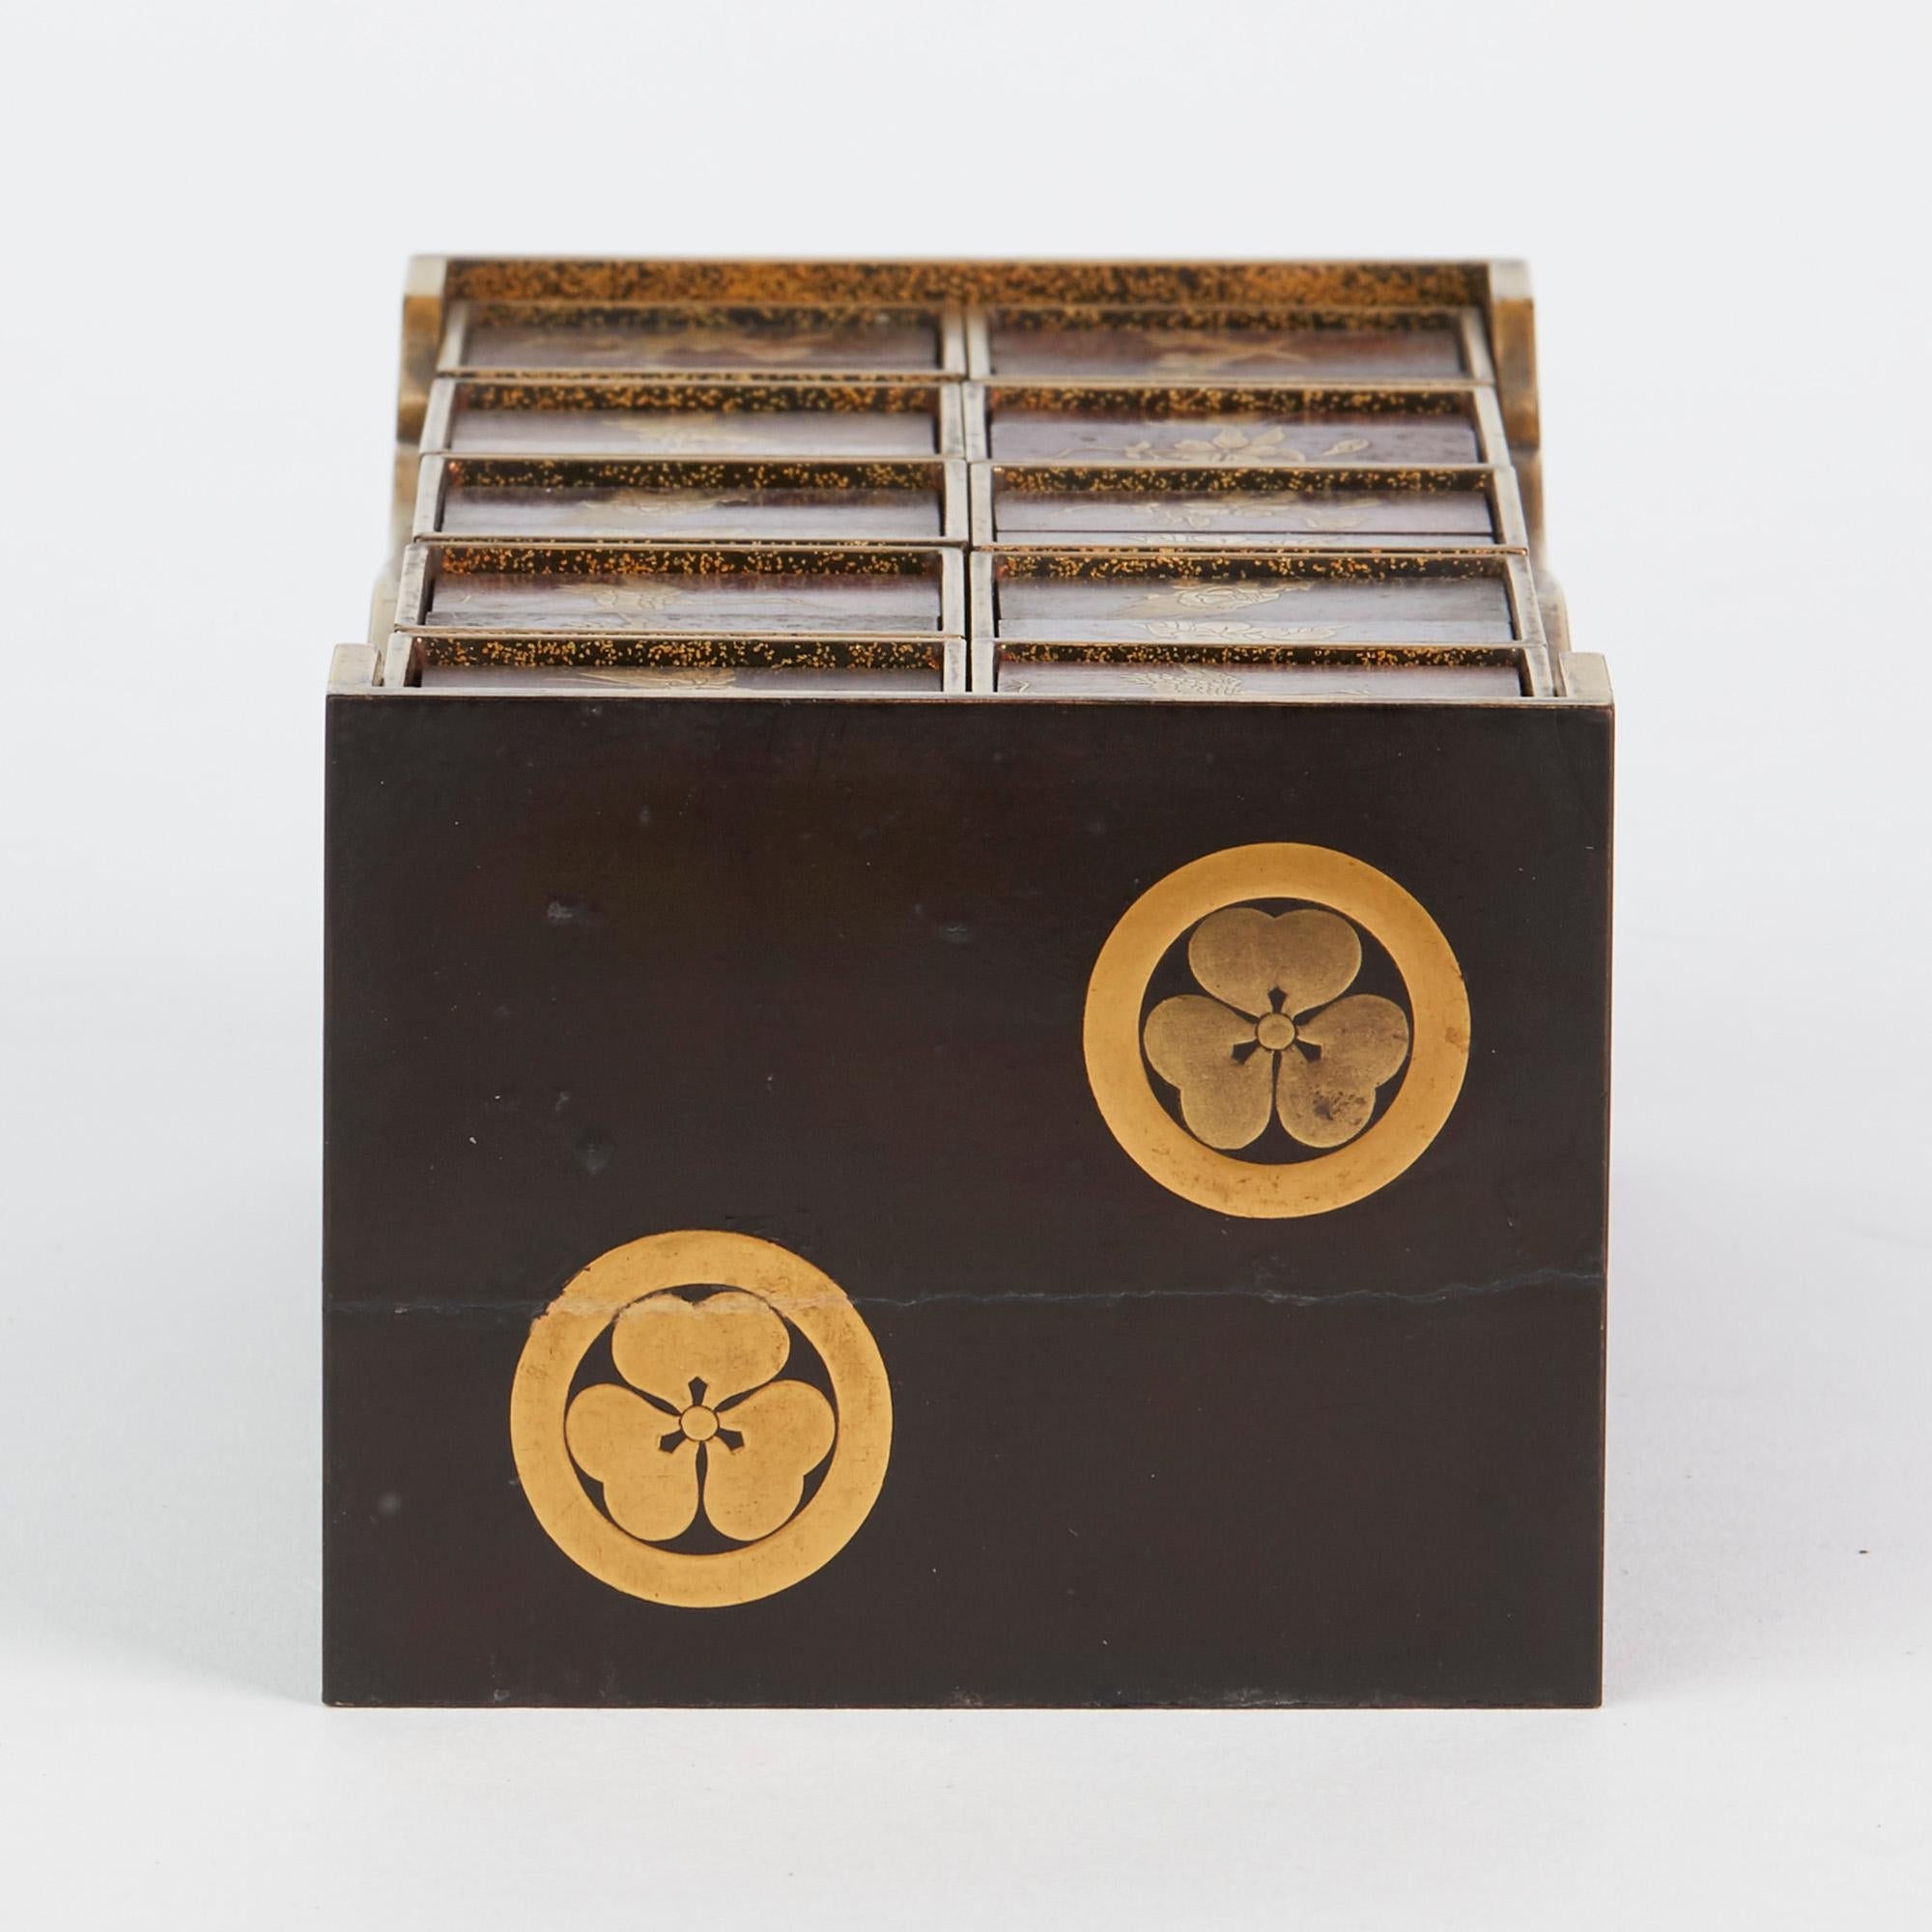 An exceptional and rare antique Japanese lacquered wooden sensory game dating from the 19th century. This very finely made set comprises of a table shaped box decorated in gold with three leaf clover like designs with a gold lacquered shelf below